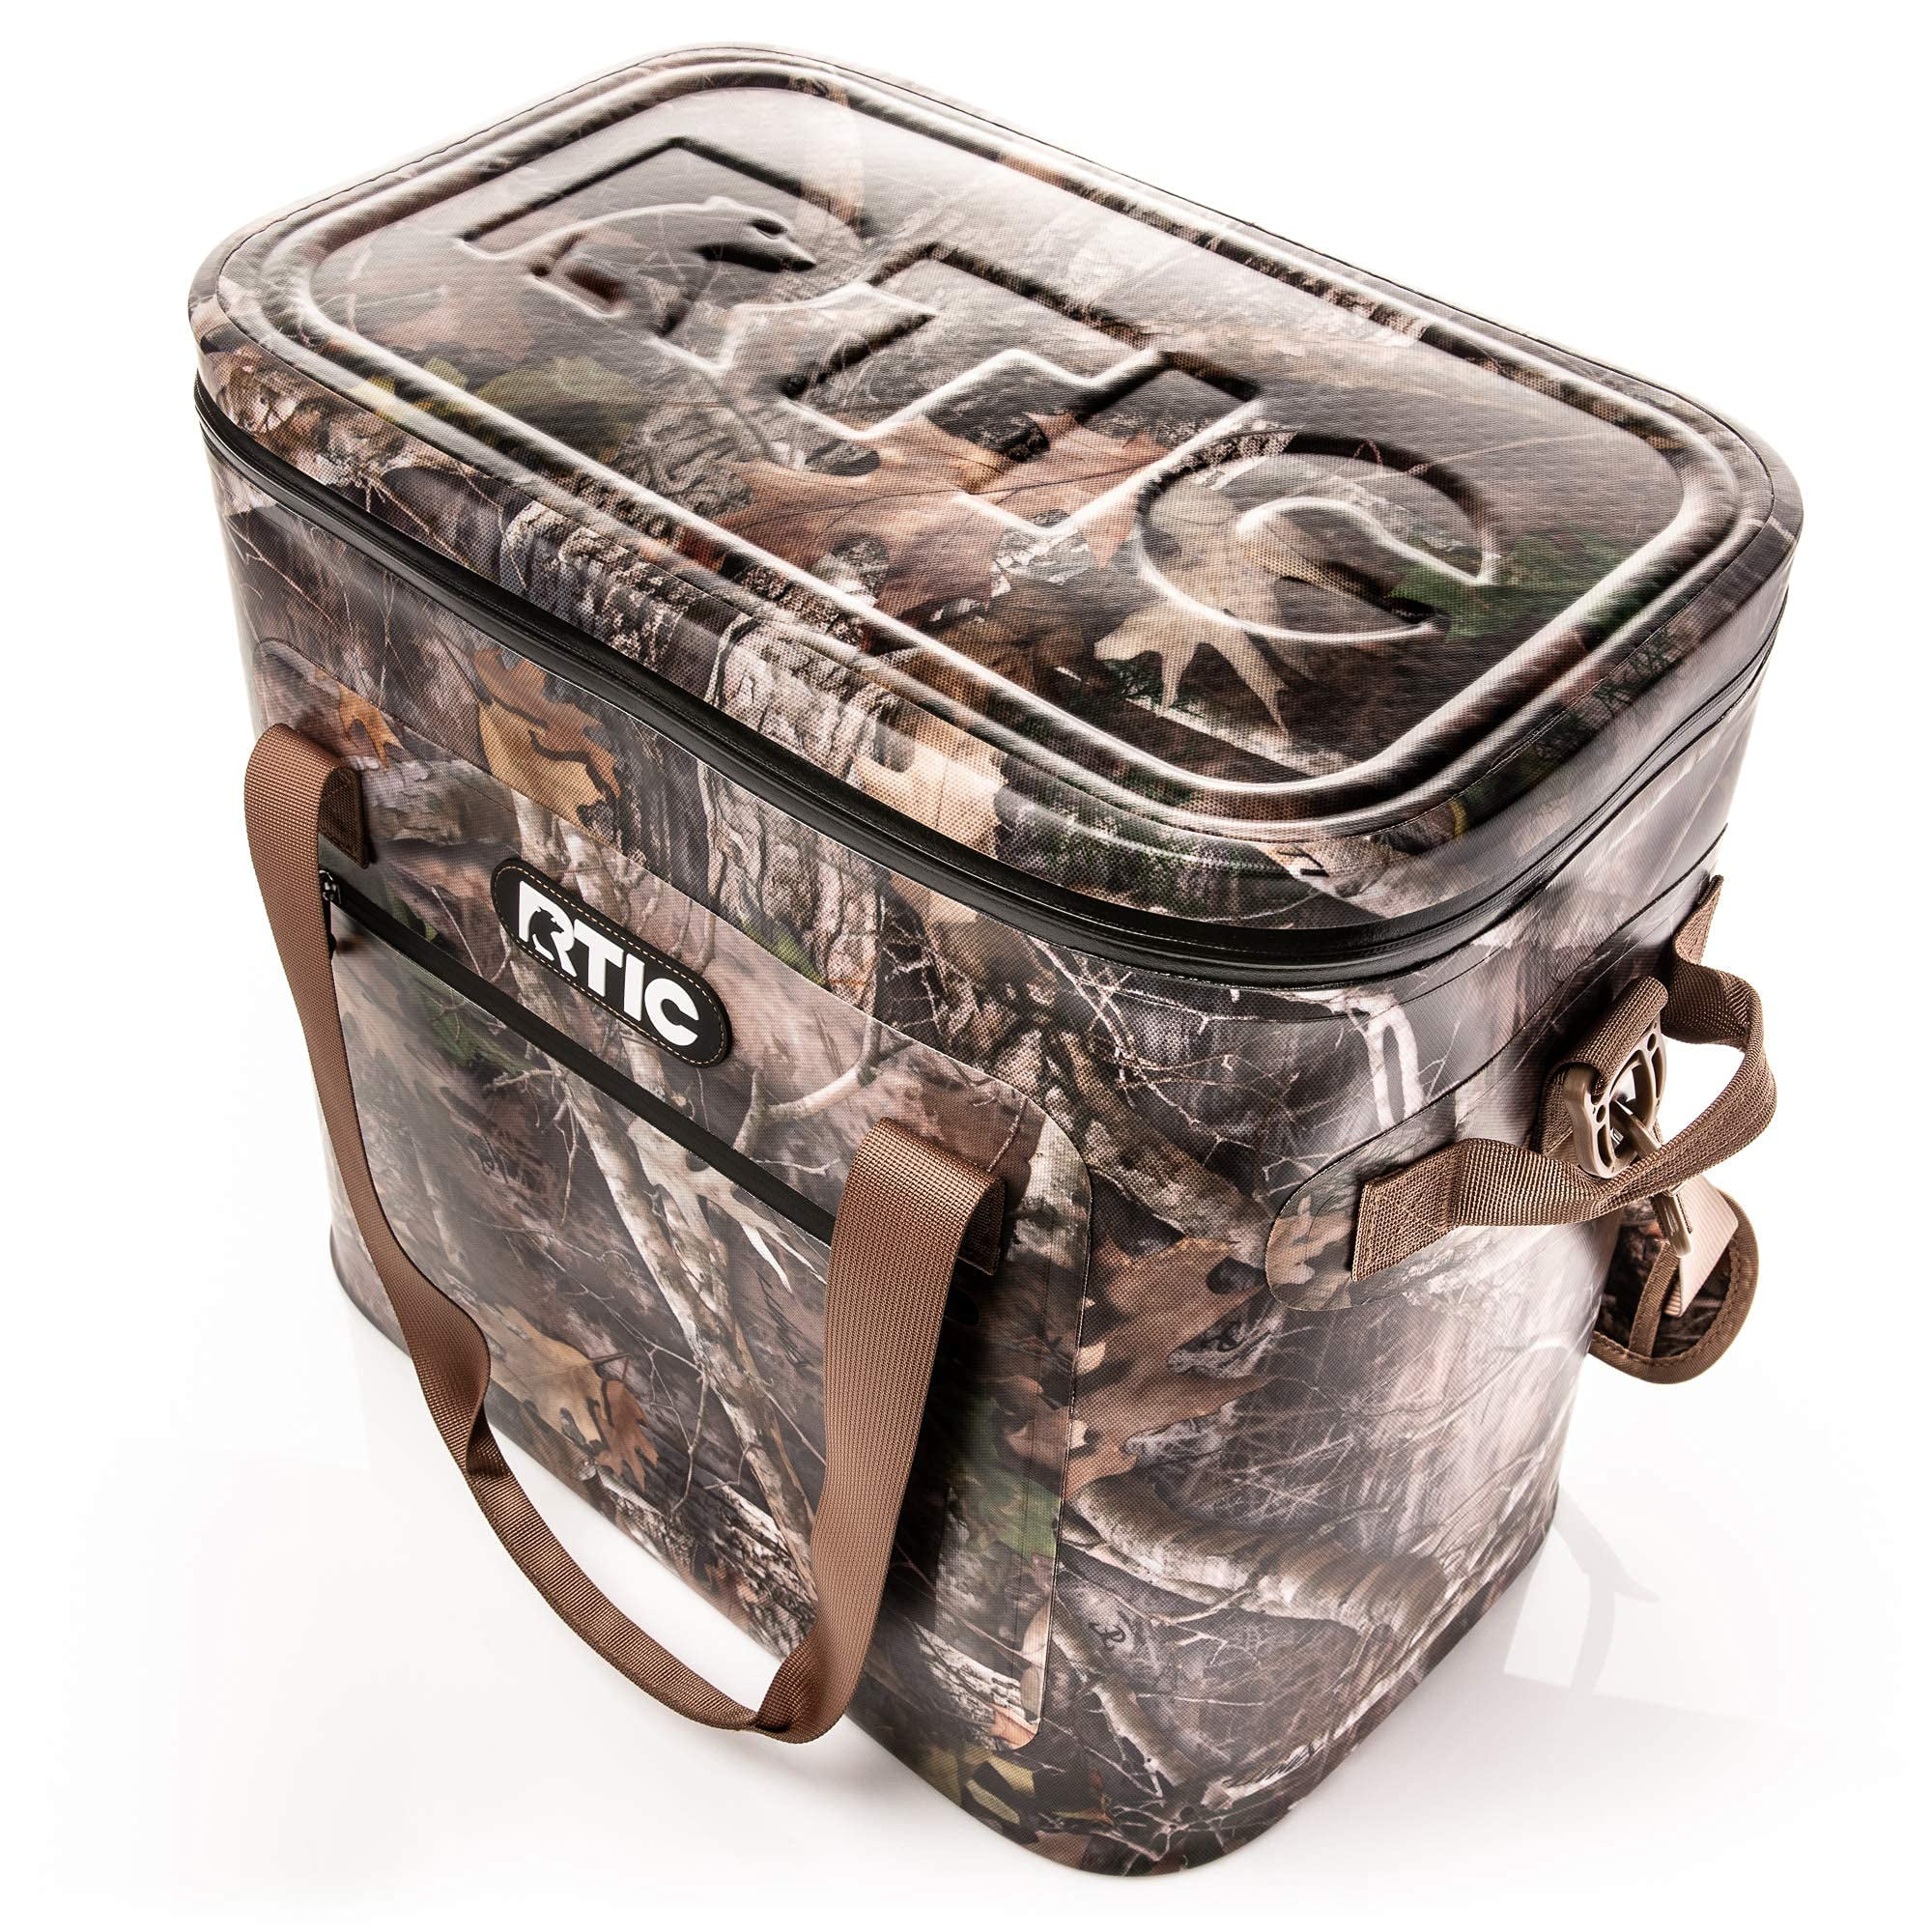 RTIC Soft Cooler 40 Can, Insulated Bag Portable Ice Chest Box for